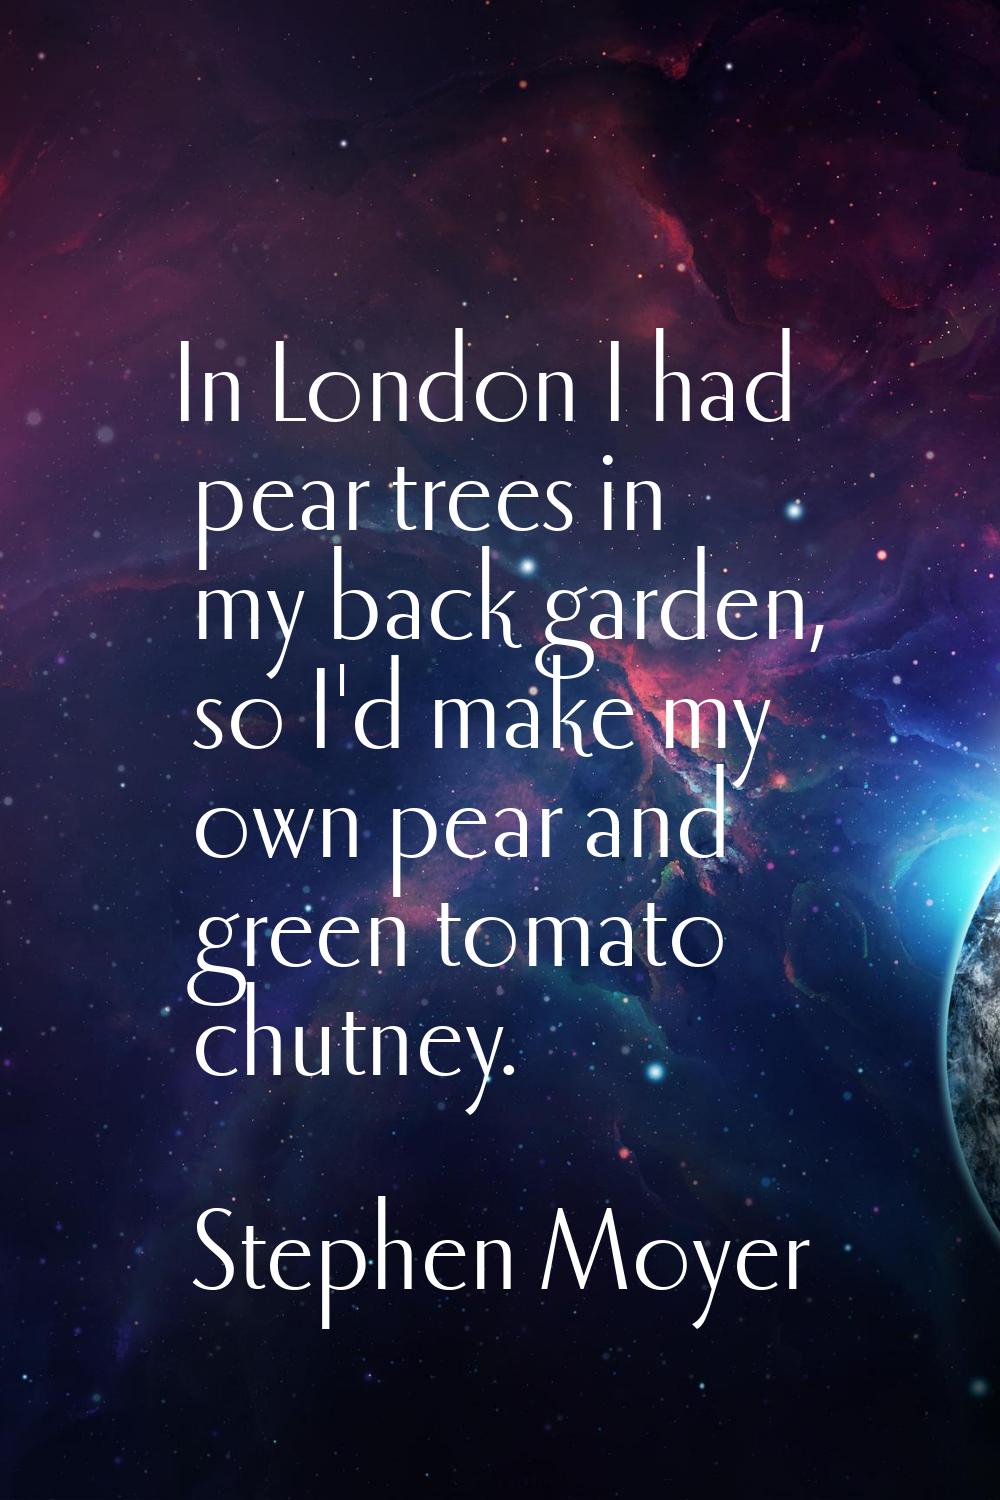 In London I had pear trees in my back garden, so I'd make my own pear and green tomato chutney.